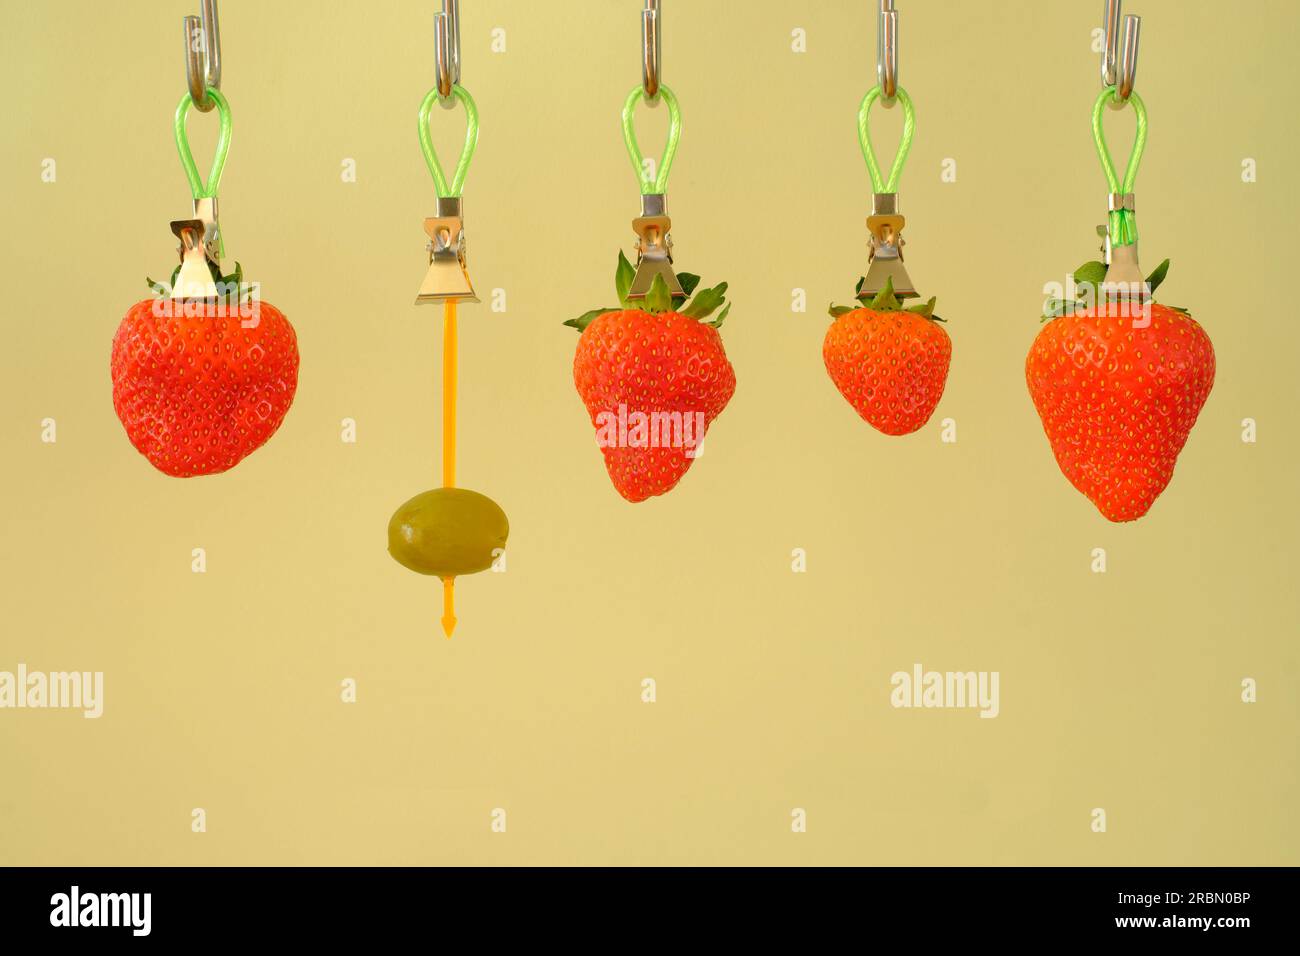 business concept, thinking outside the box, idea,unique selling point,human resources innovation,hanging strawberries with one olive Stock Photo